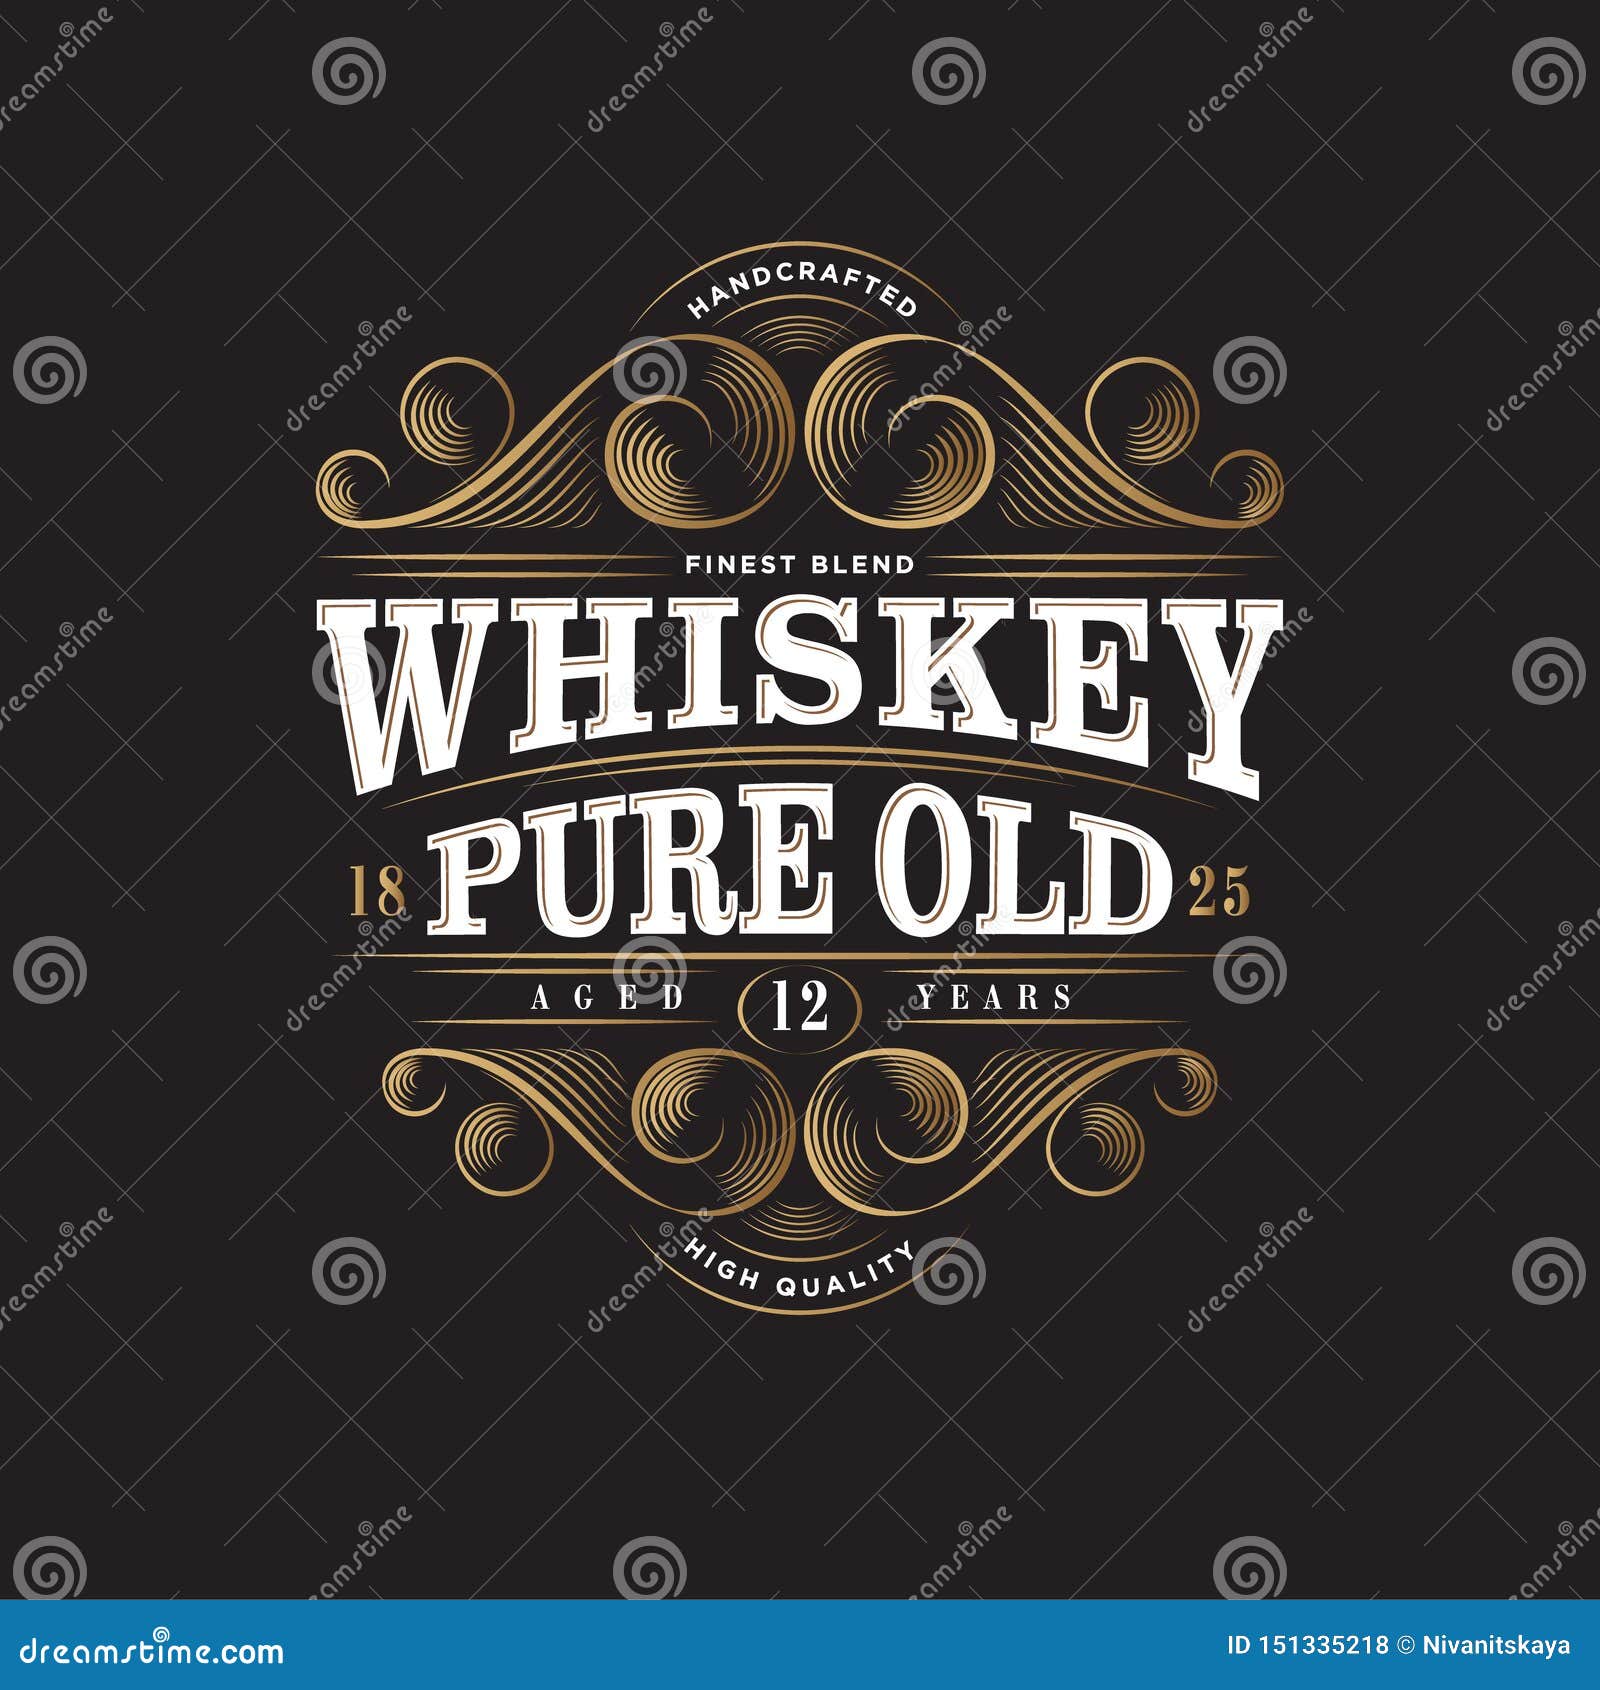 whiskey logo. whiskey pure old label. premium packaging . lettering composition and curlicues decorative s.